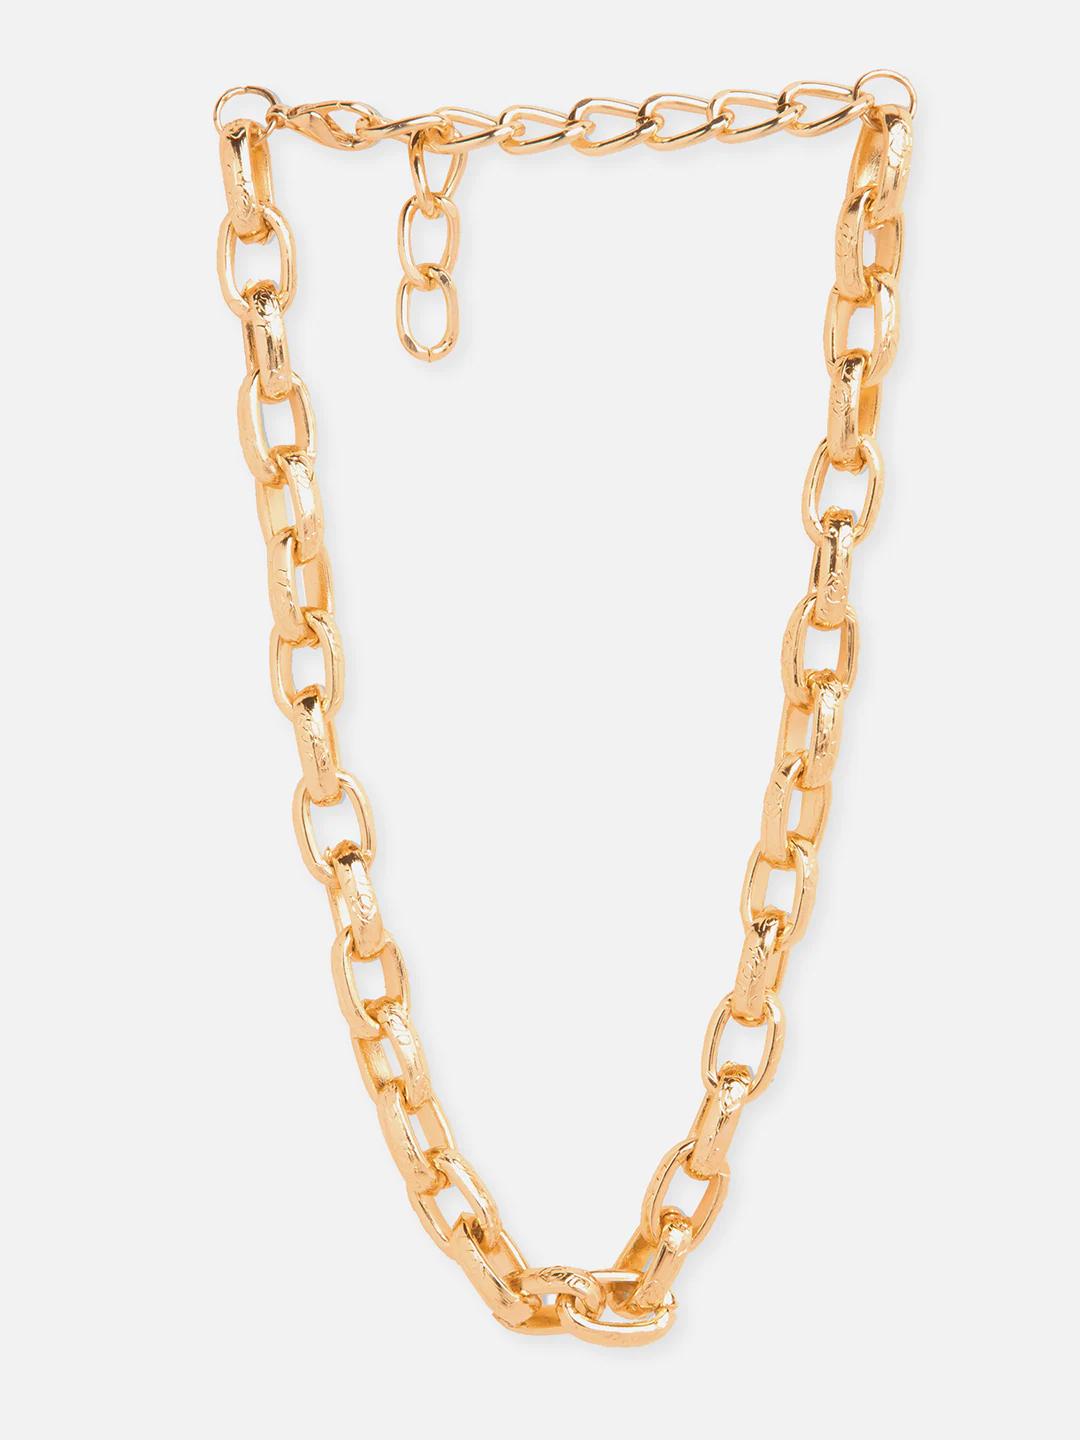 20Dresses Gold-Toned Choker Necklace